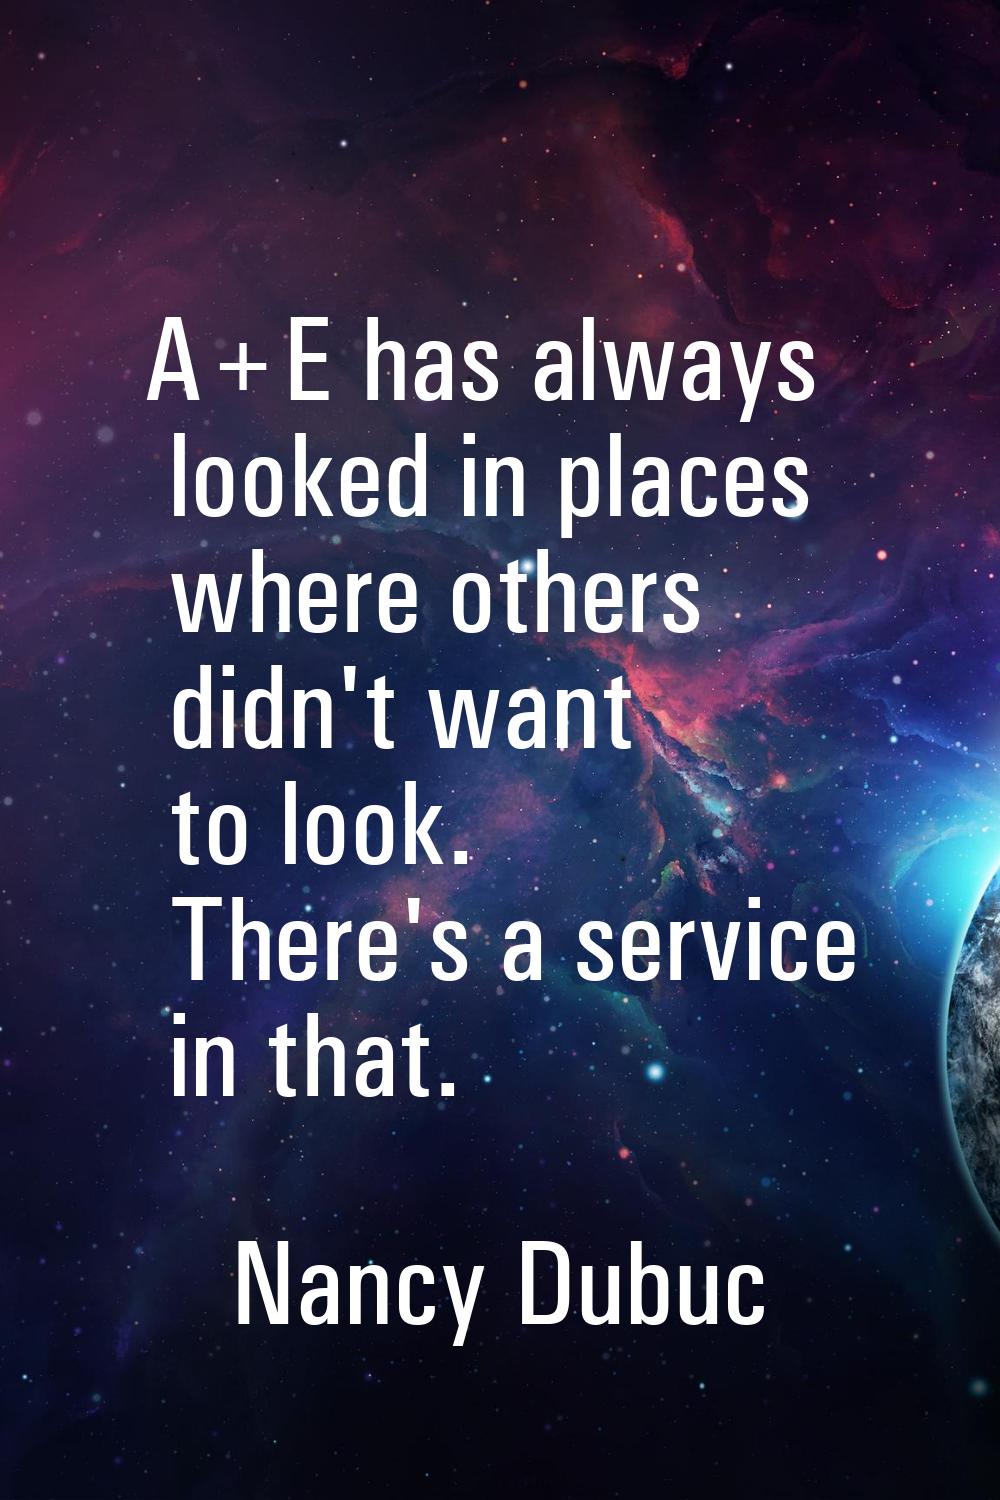 A+E has always looked in places where others didn't want to look. There's a service in that.